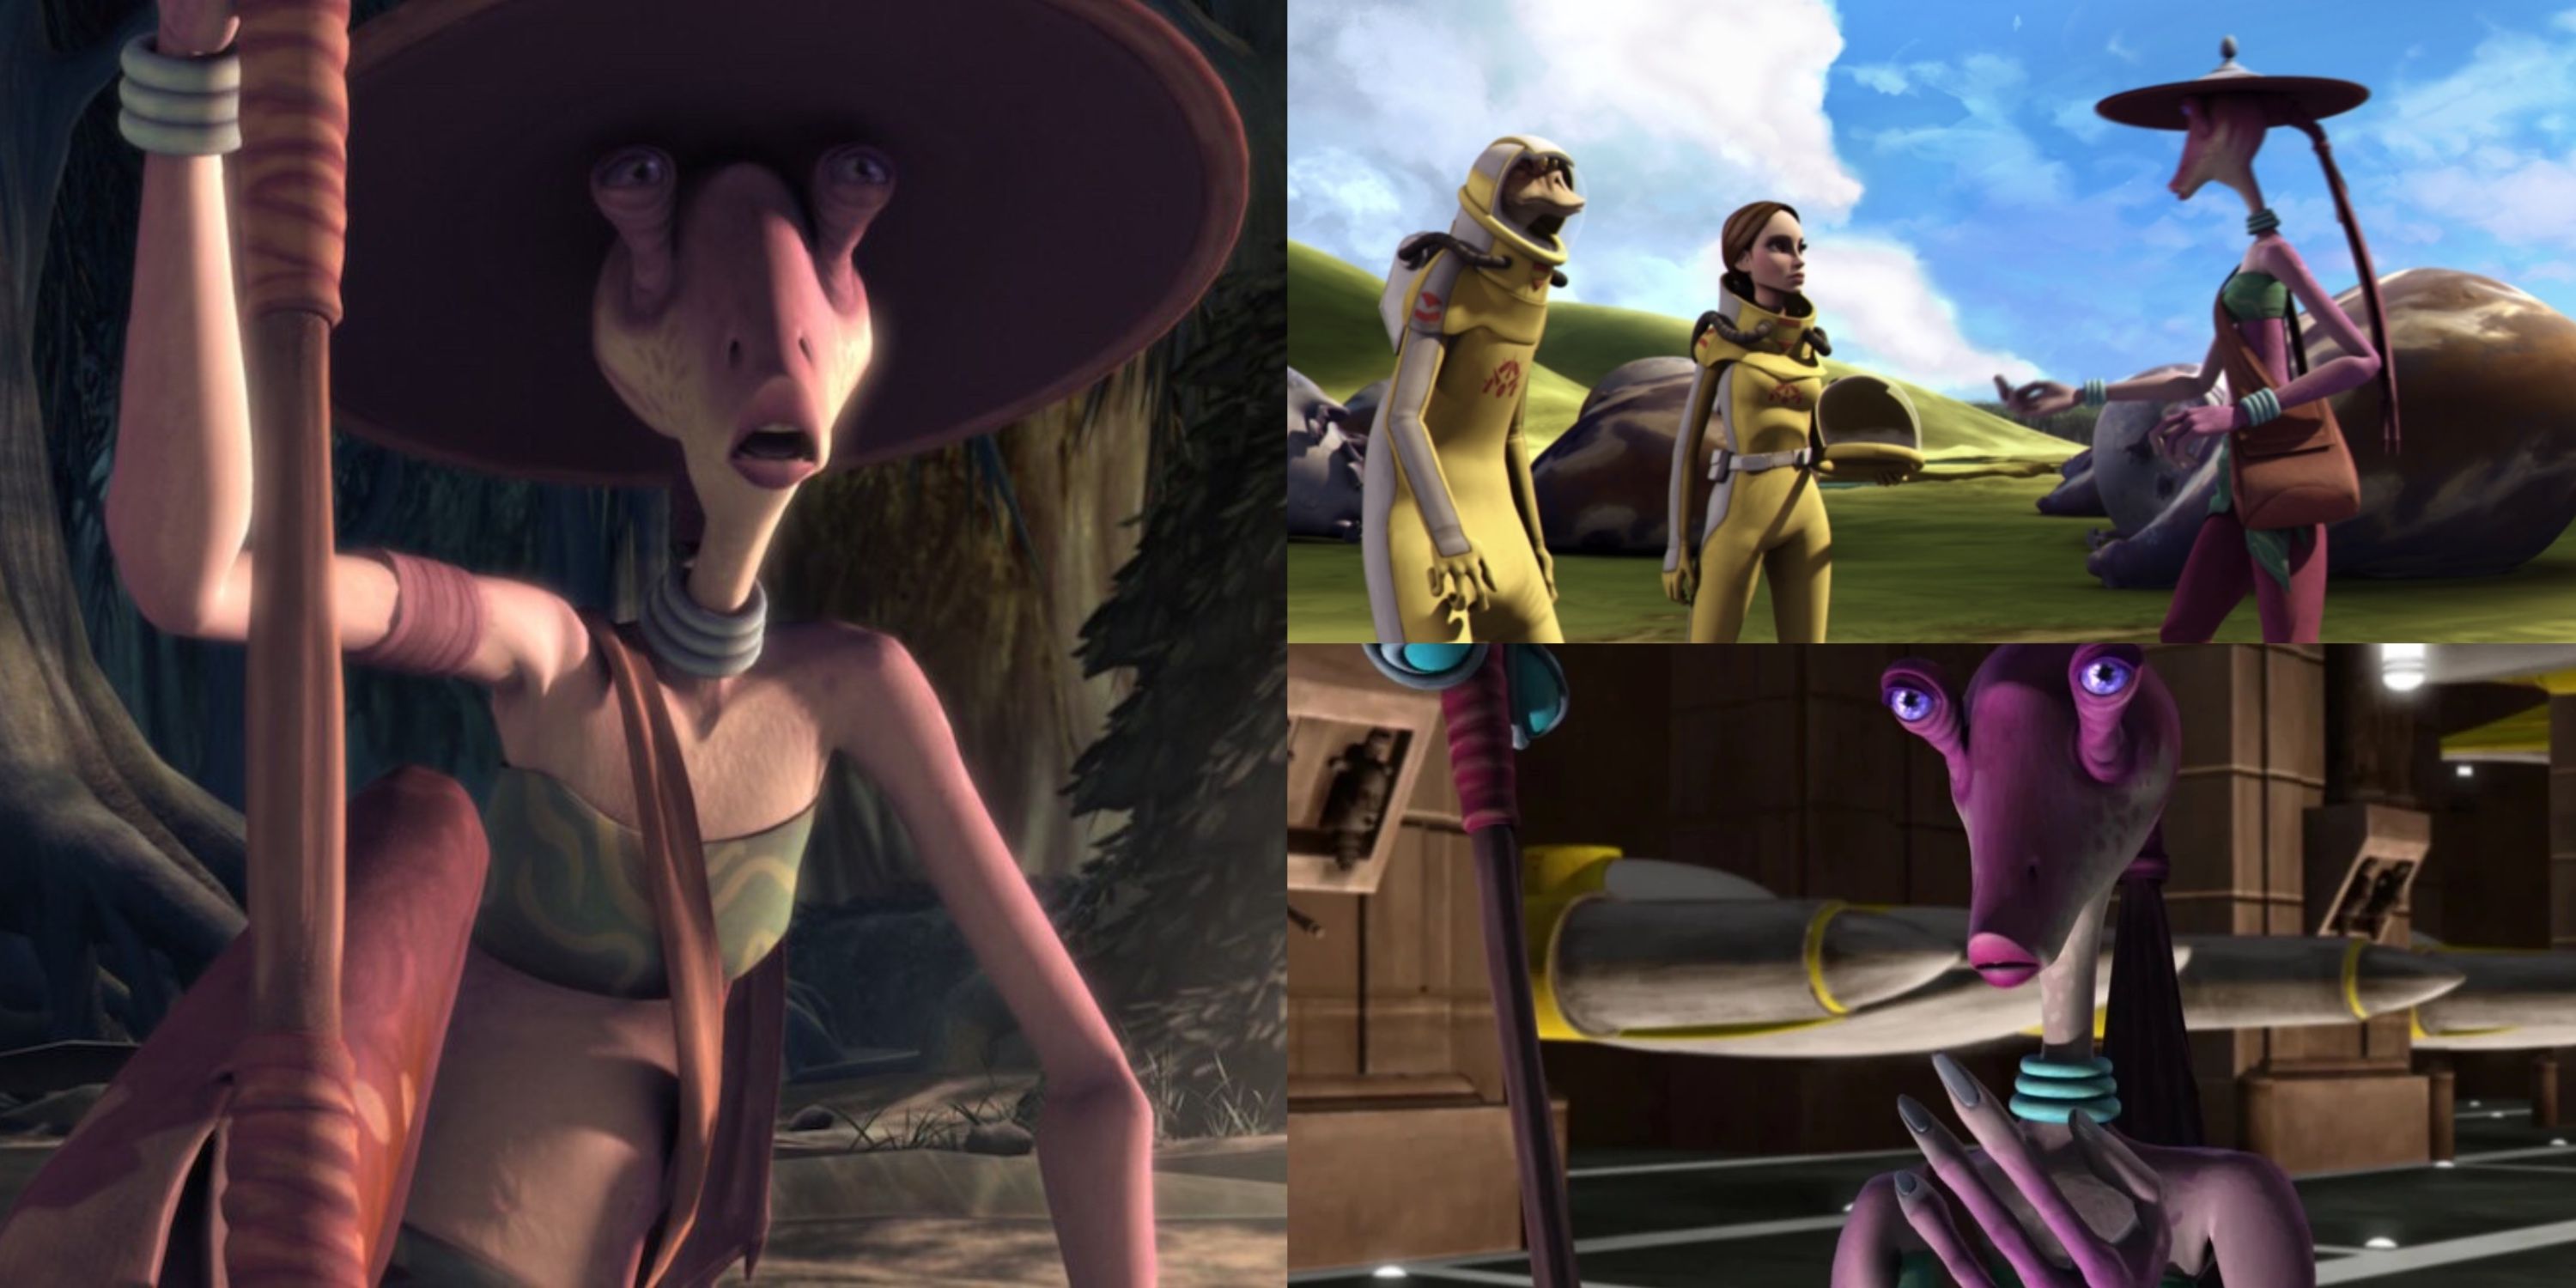 Peppi Bow screenshots from the clone wars